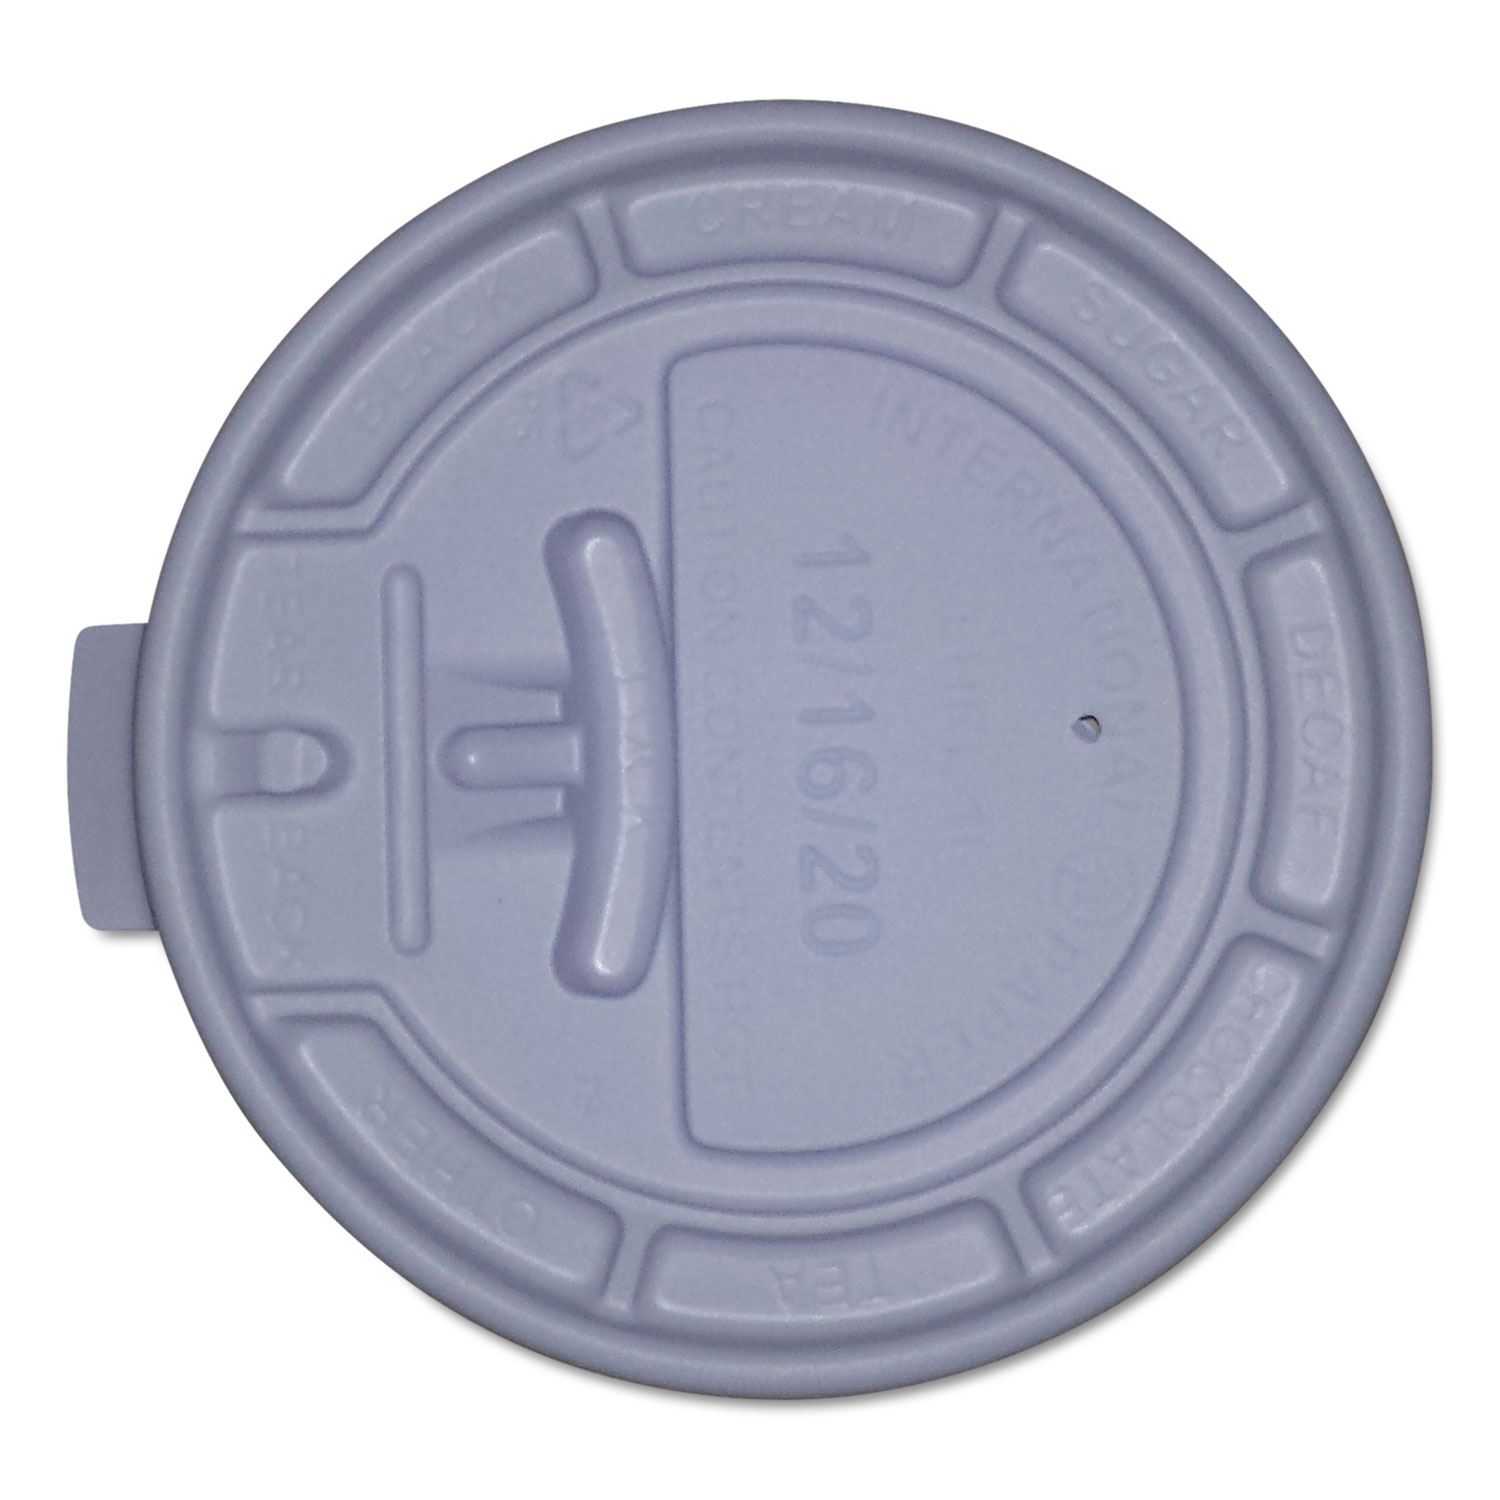  Green Mountain Coffee 93782 Plastic Lids for Eco-Friendly Hot Cups, Lock Tab/Flat, White, 1000/Carton (GMT93782) 